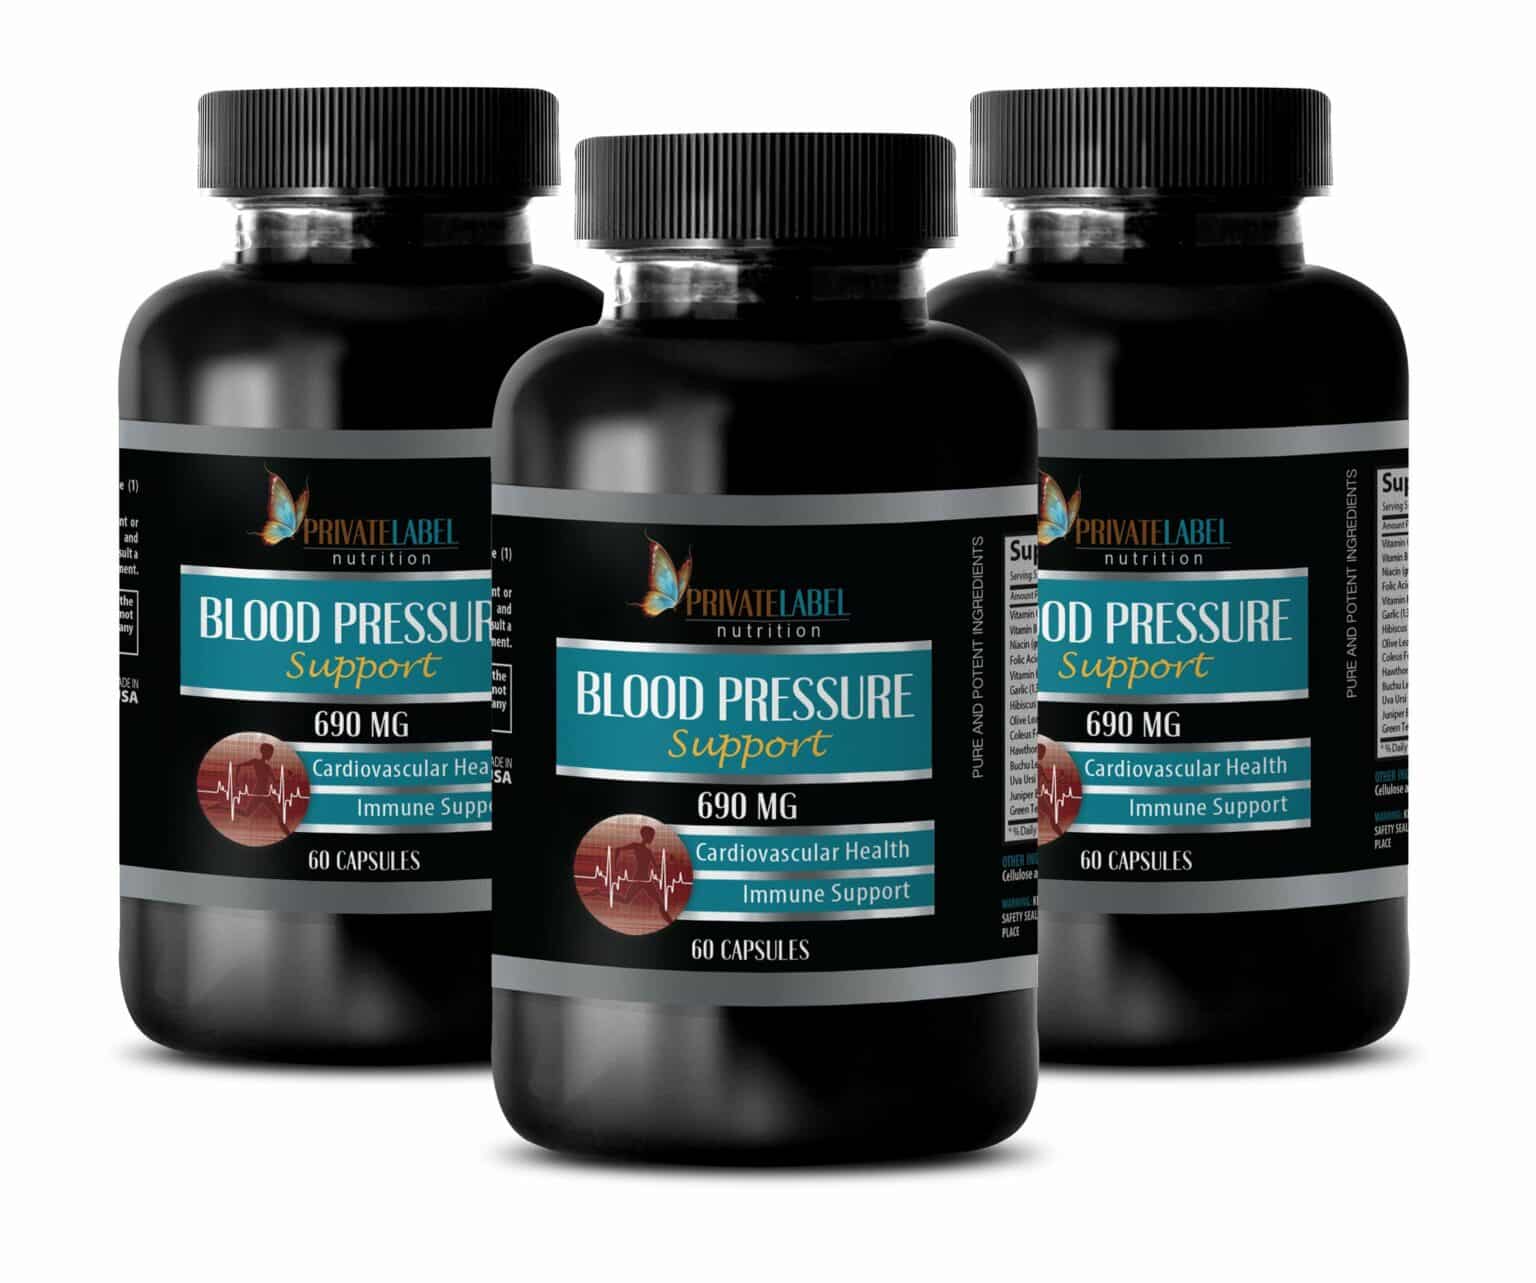 Blood Pressure lowering Supplement  Blood Pressure Support 690MG ...